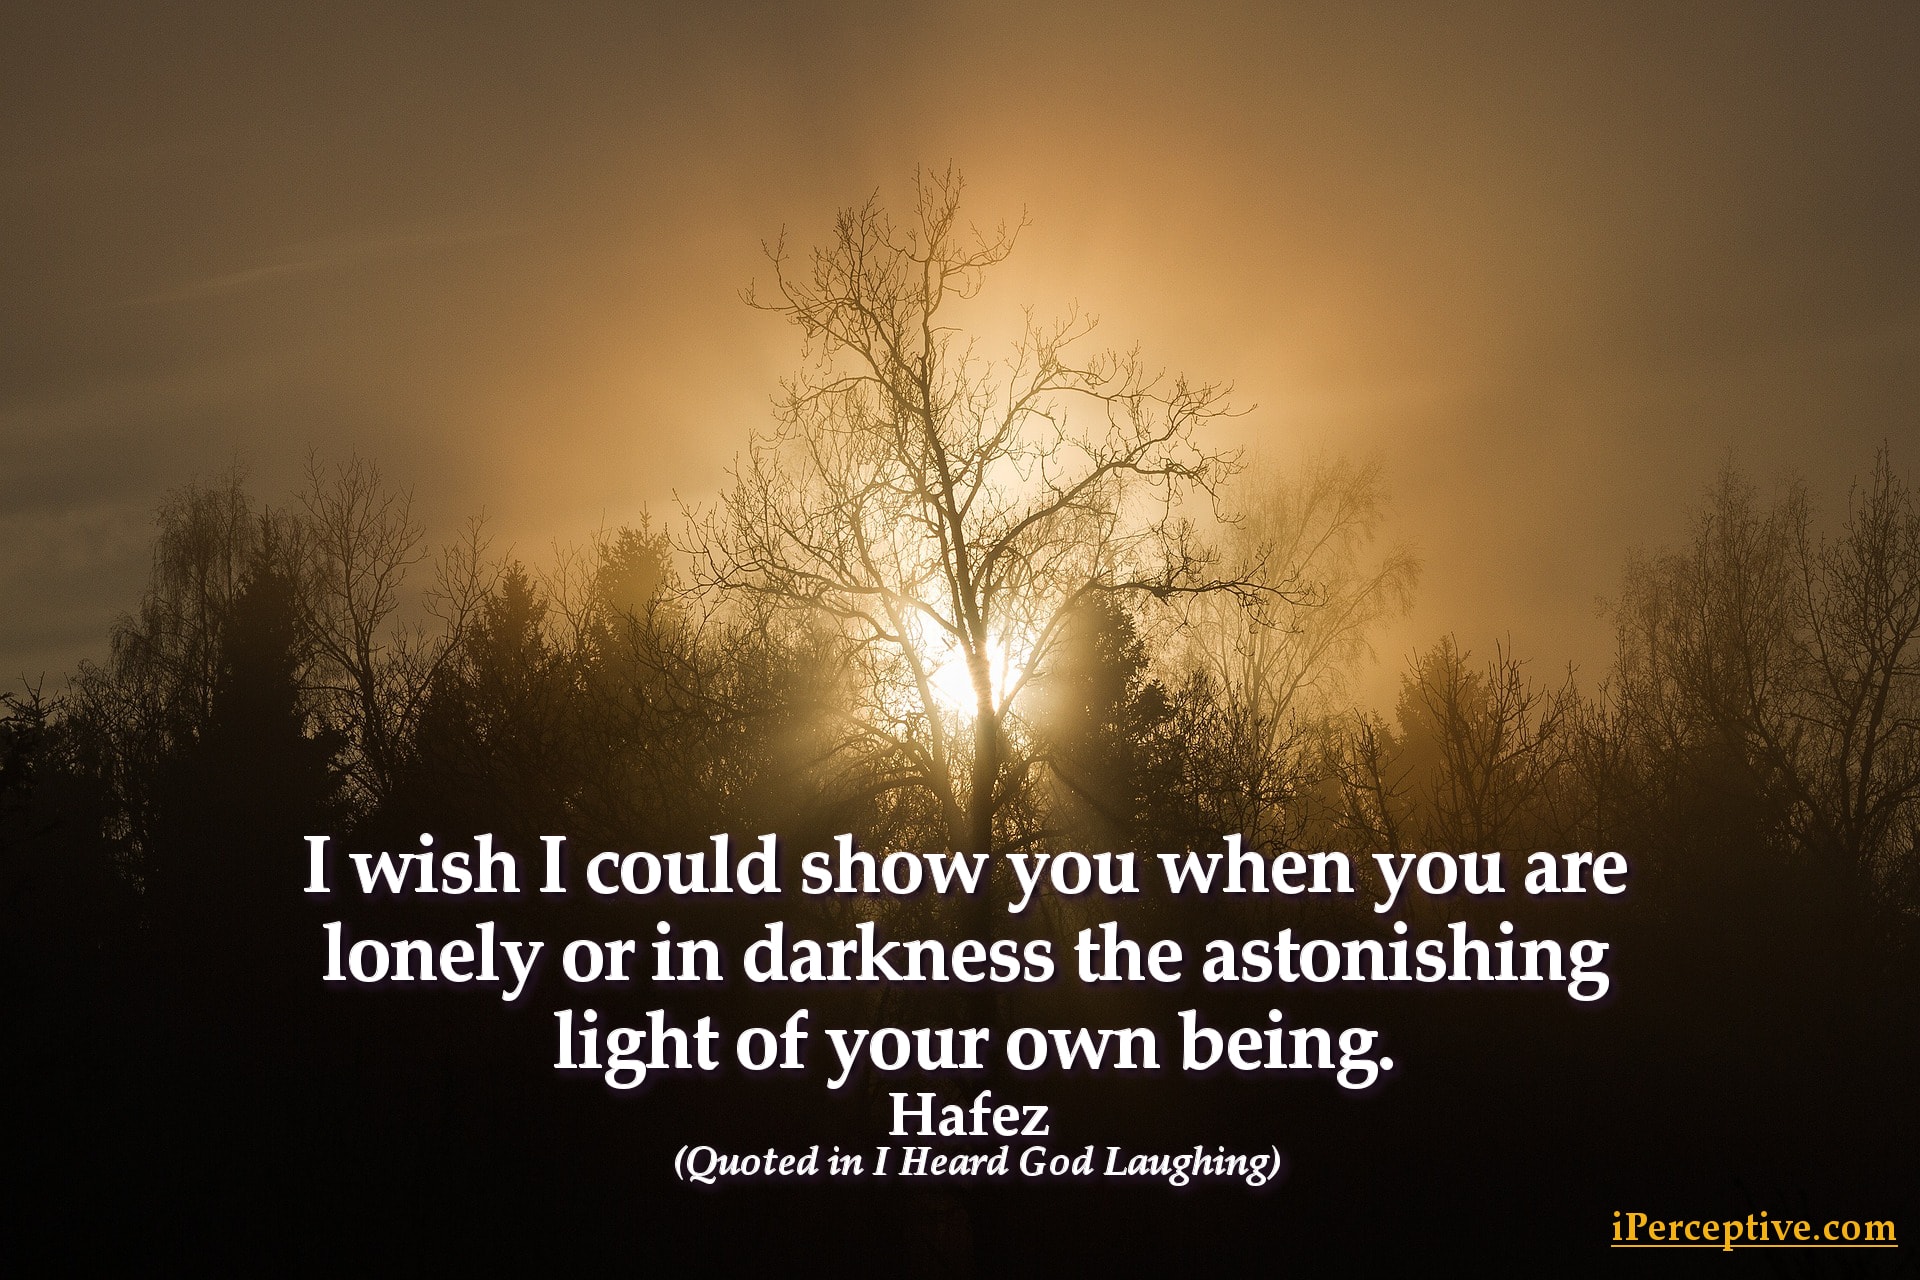 Hafez Quote: I wish I could show you when you are lonely or in darkness the astonishing light ...